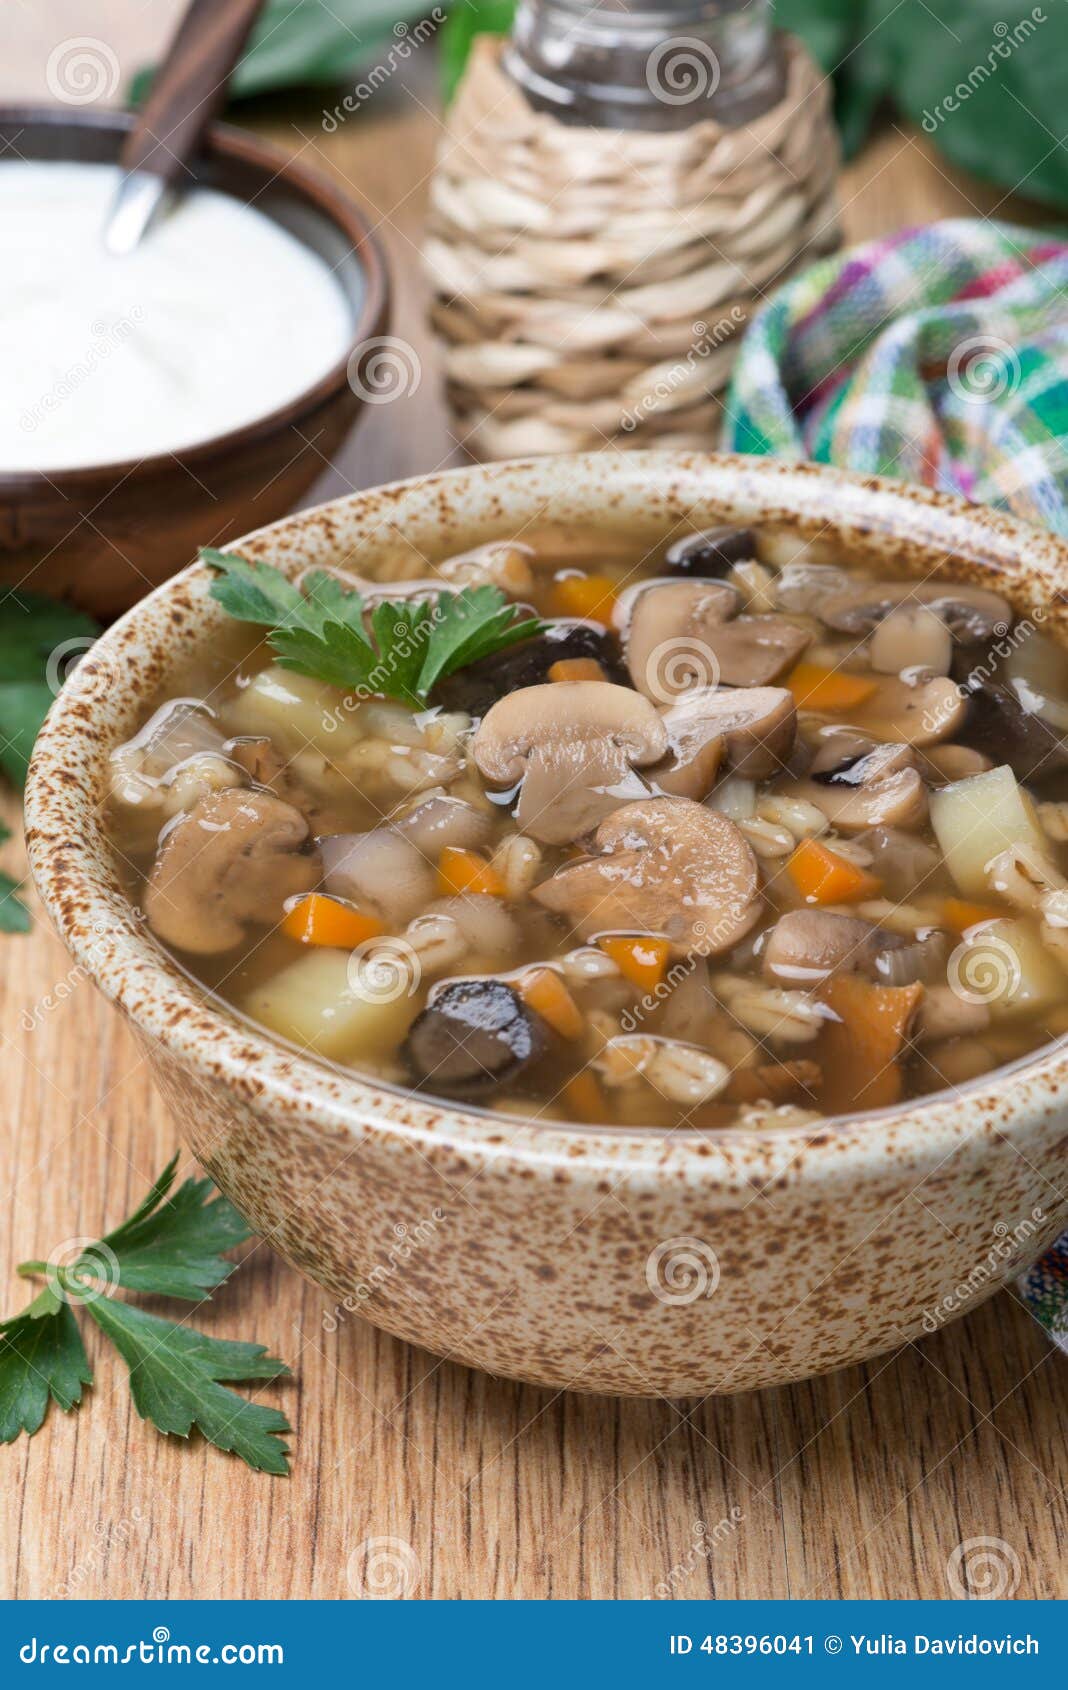 Mushroom Soup with Pearl Barley, Vertical Stock Image - Image of cereal ...